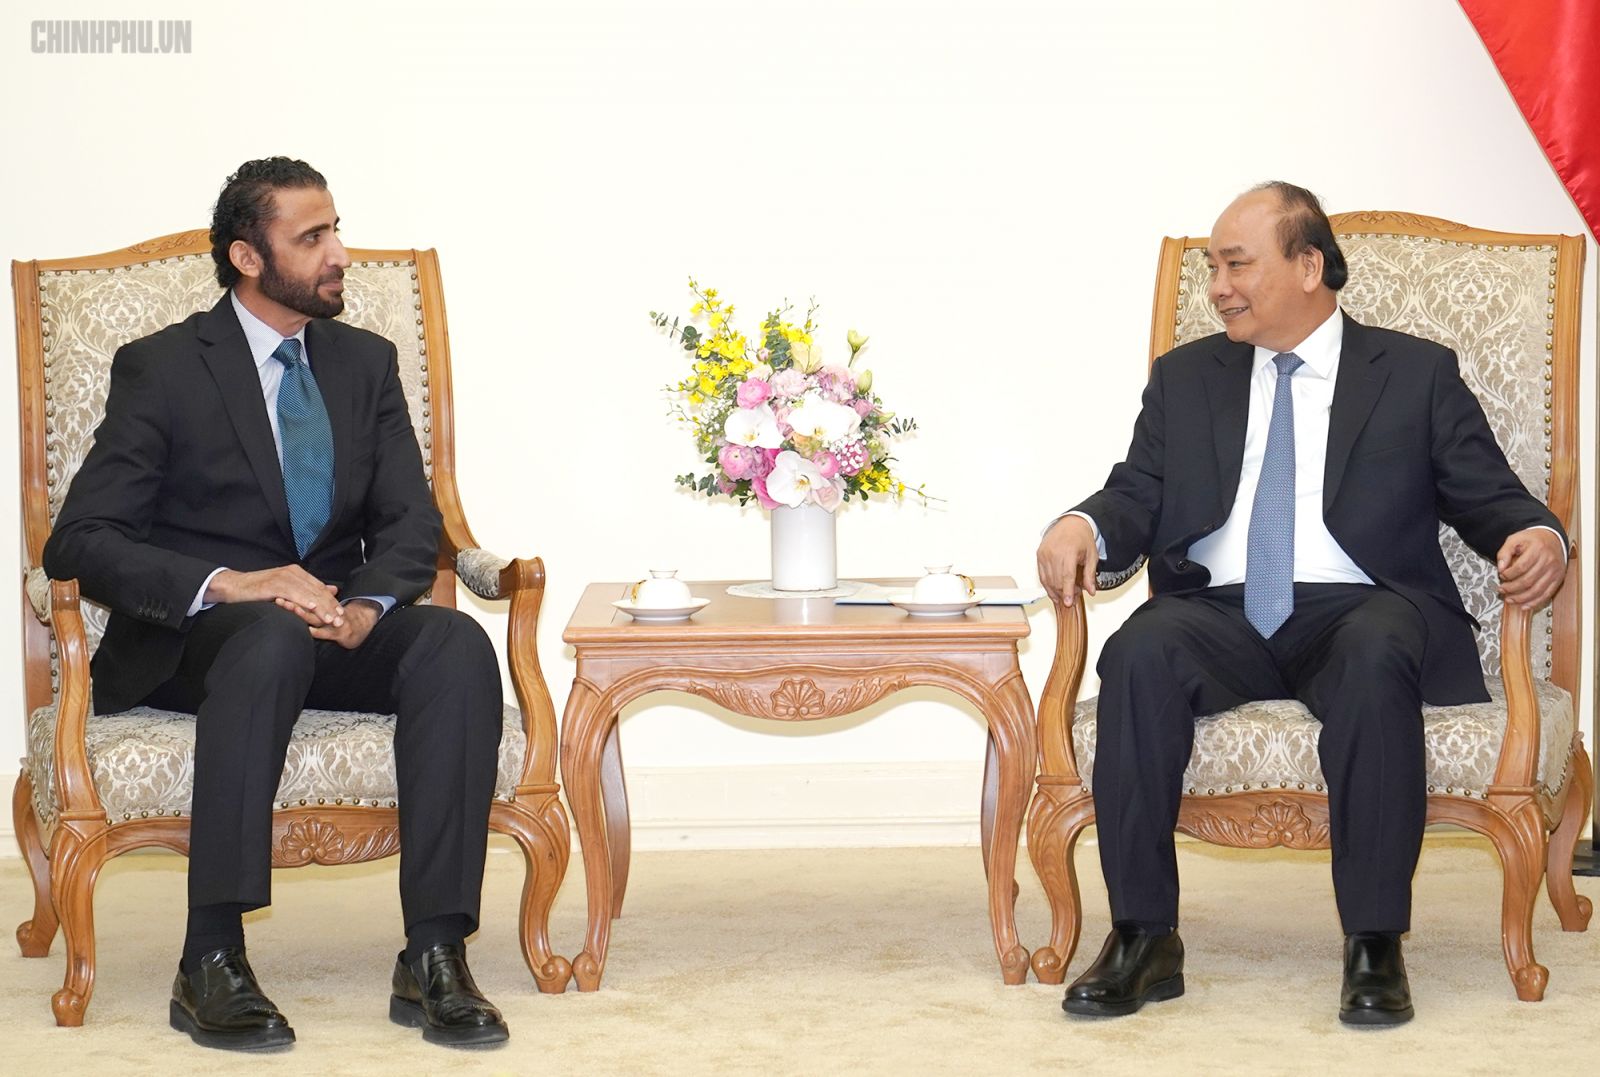 Prime Minister Nguyen Xuan Phuc (r) and Mohammed Ibrahim Al Shaibani, CEO of Investment Corporation of Dubai. (Source: VGP)